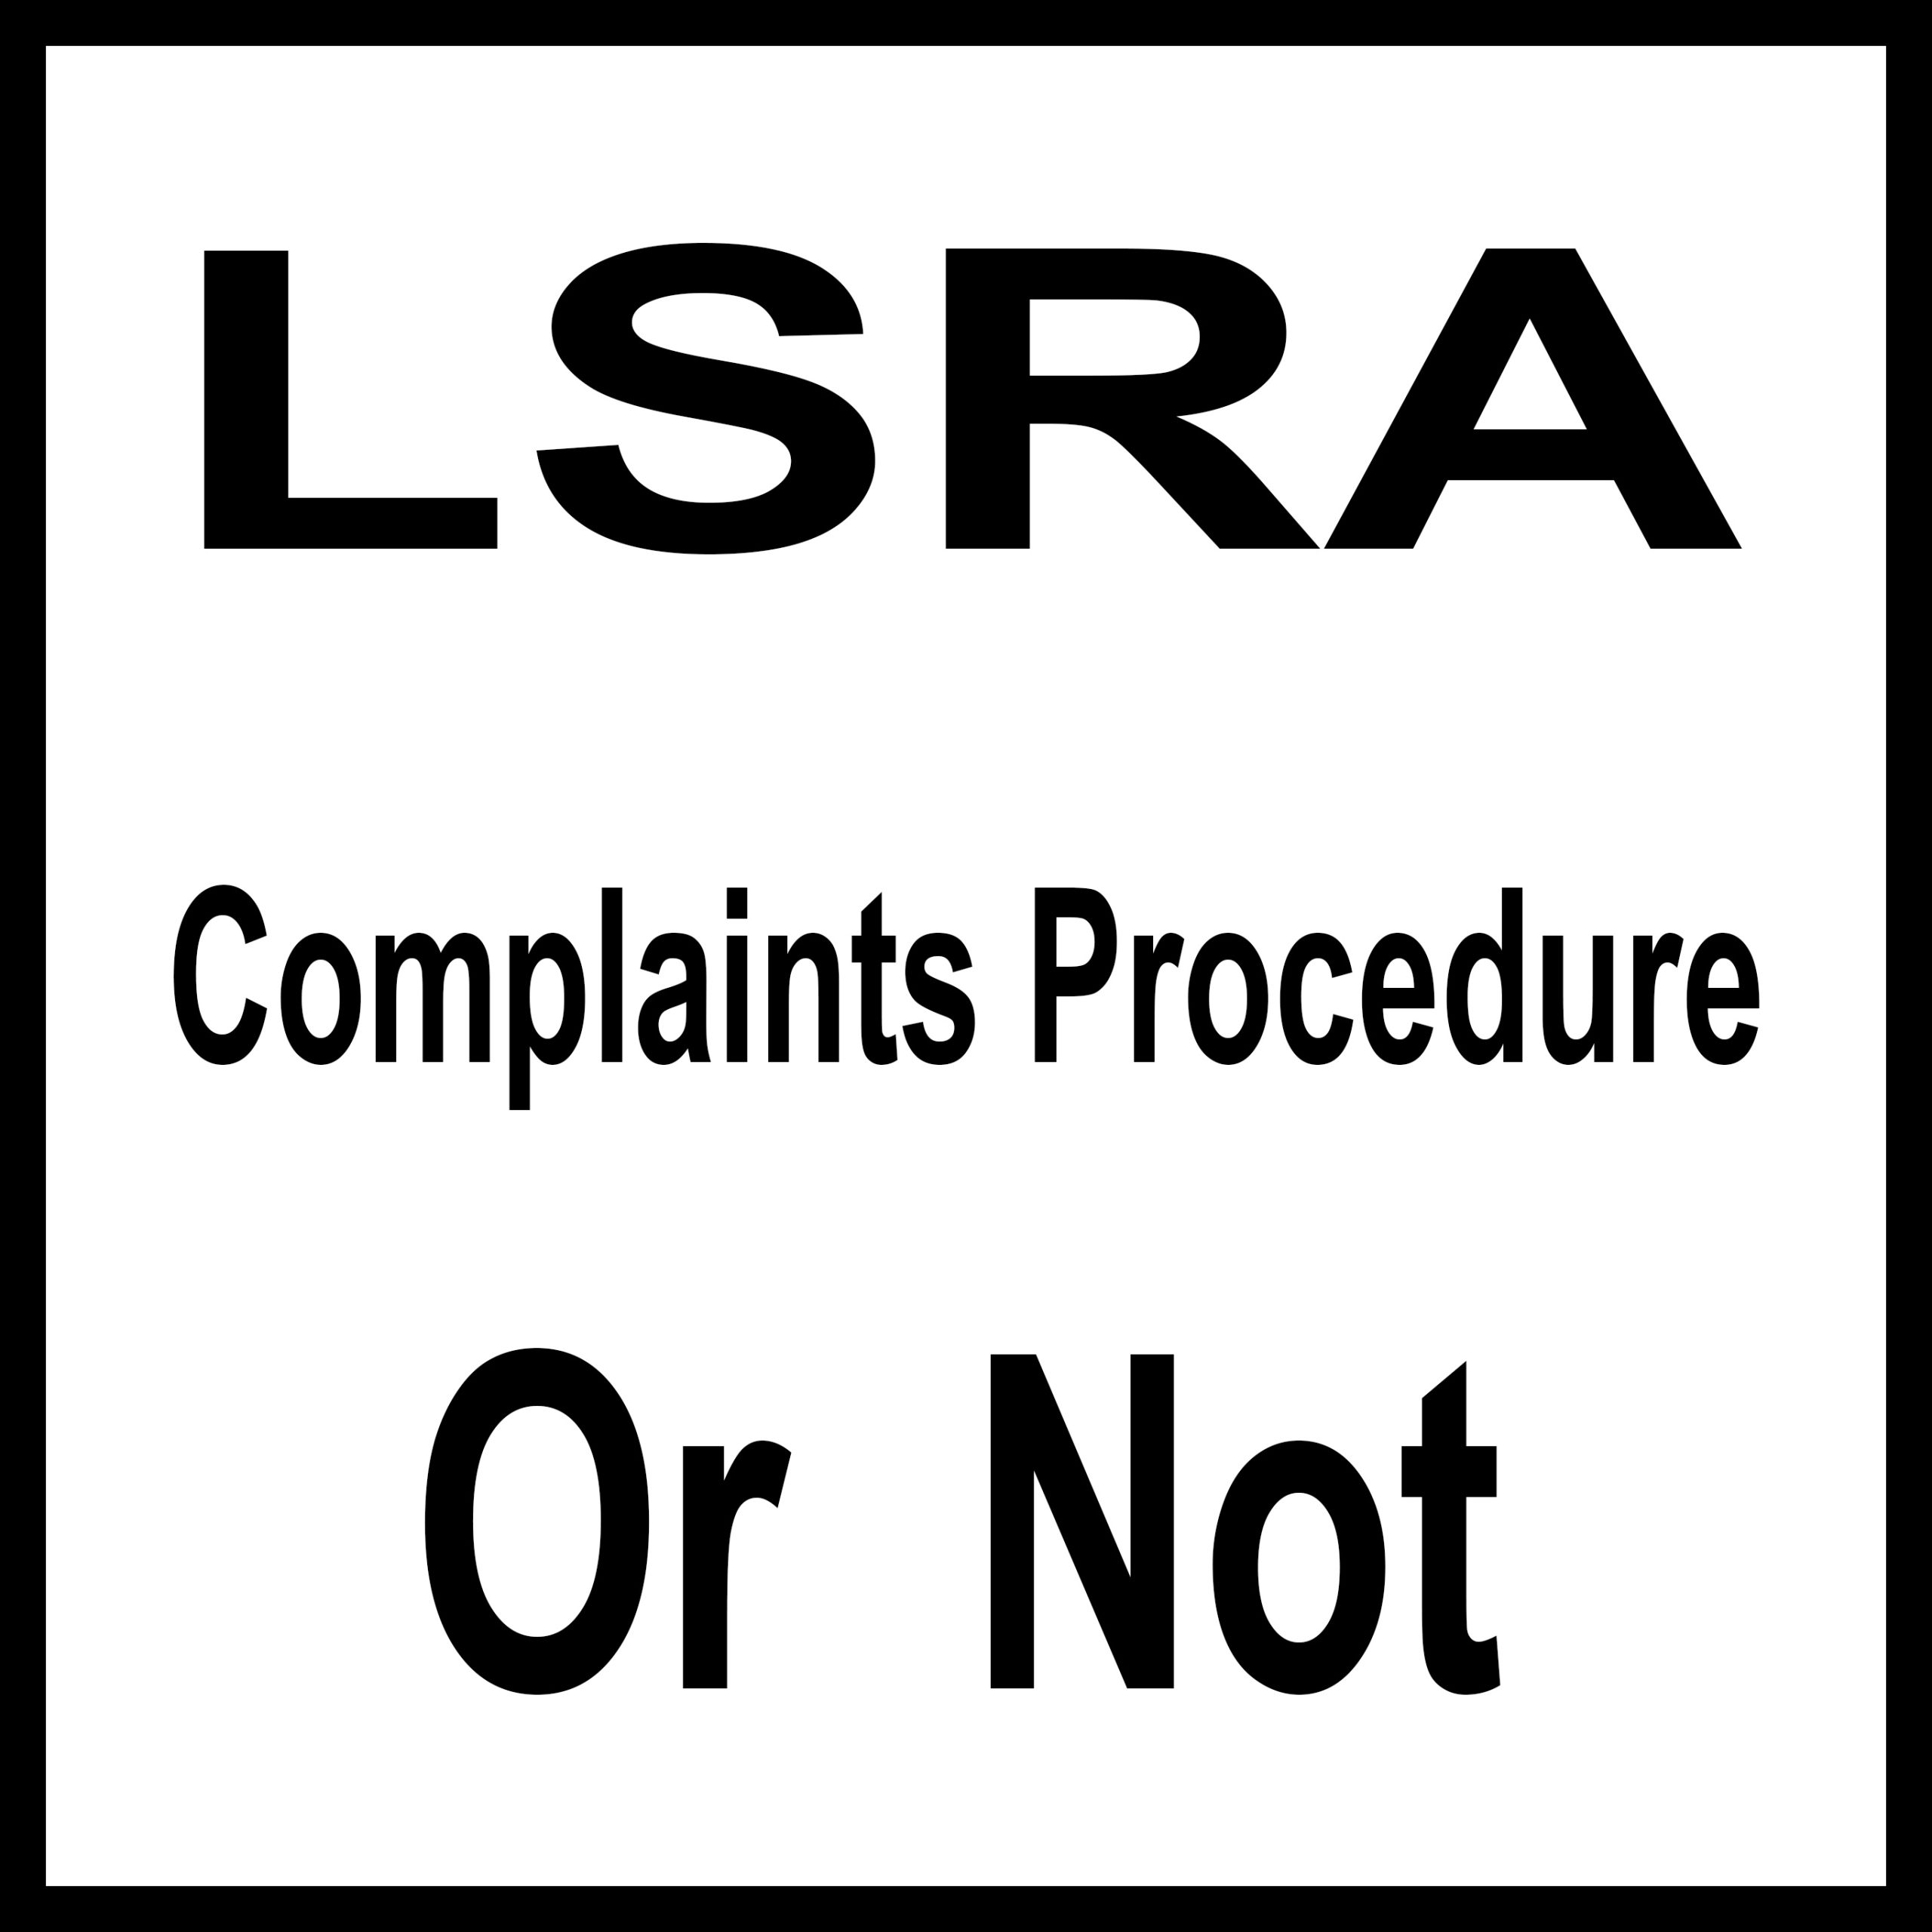 My Experience with the LSRA Complaint Procedure